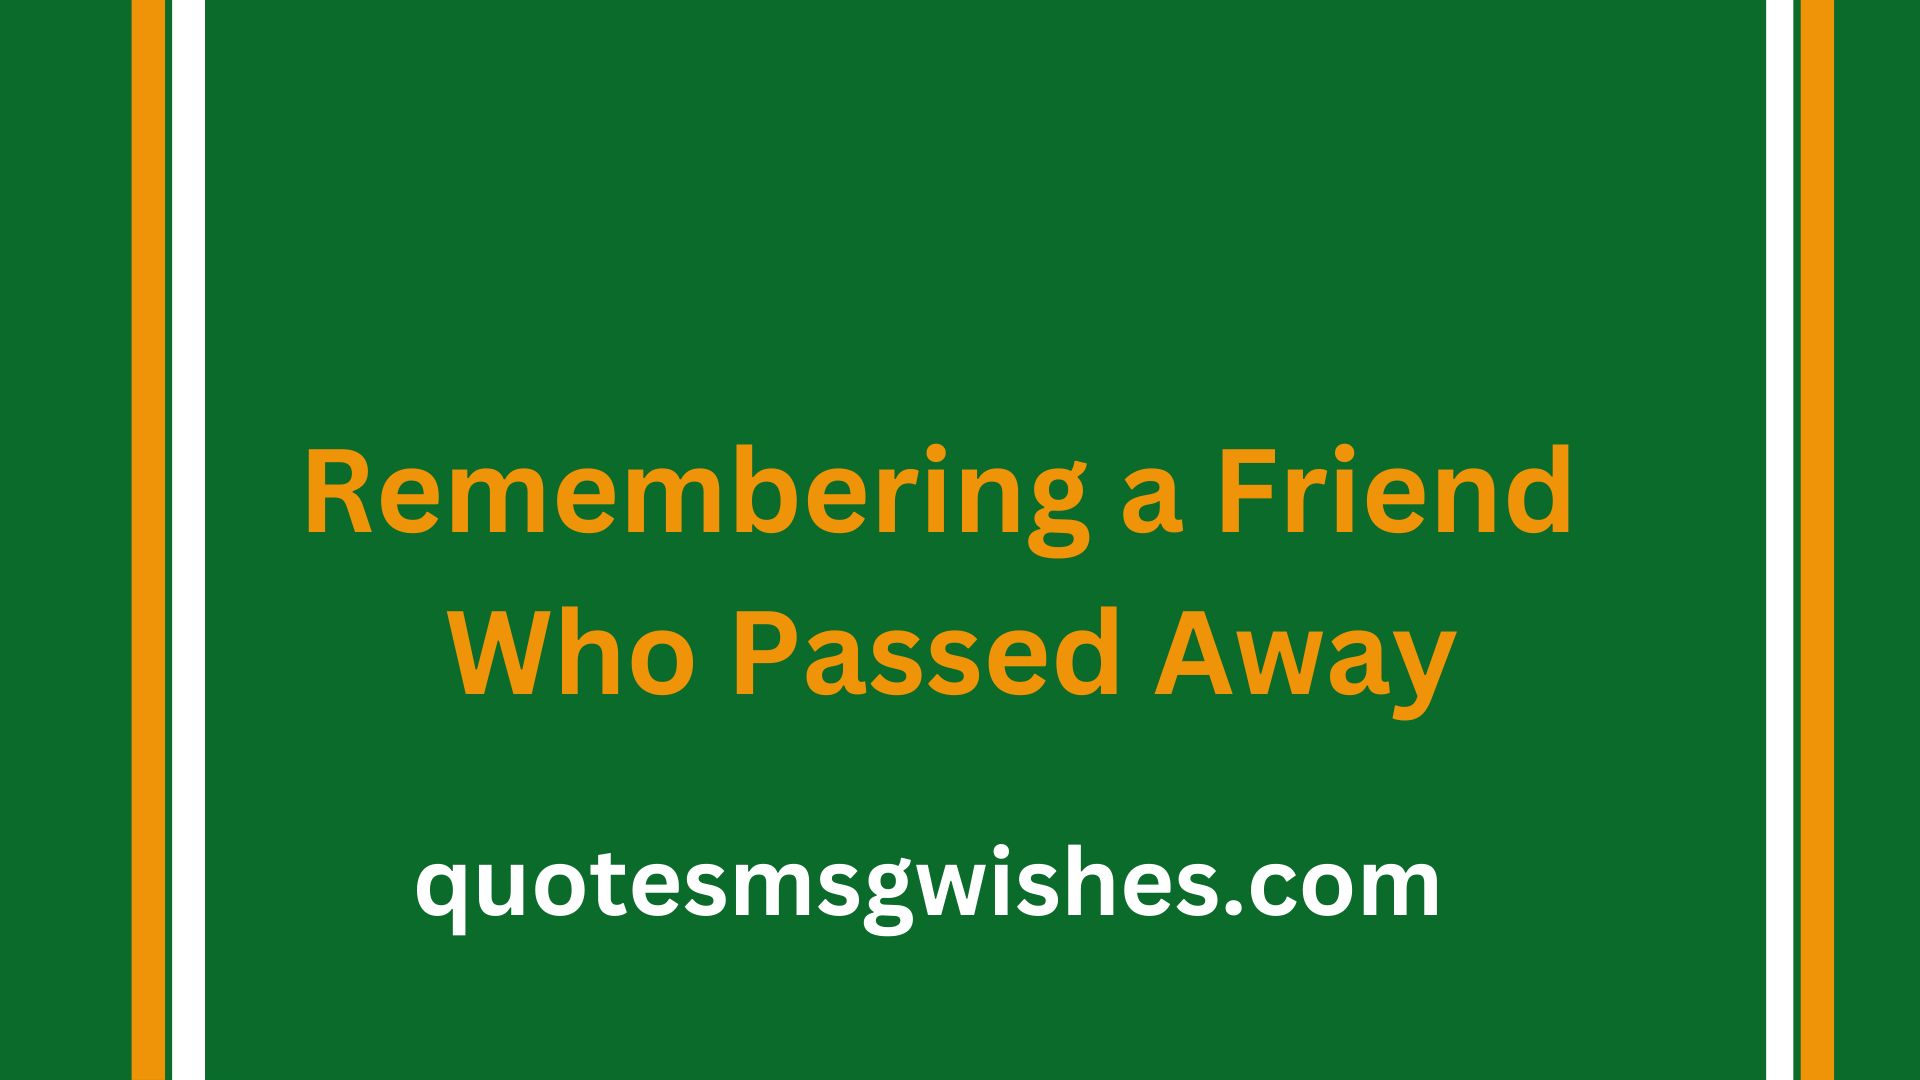 Remembering a Friend Who Passed Away